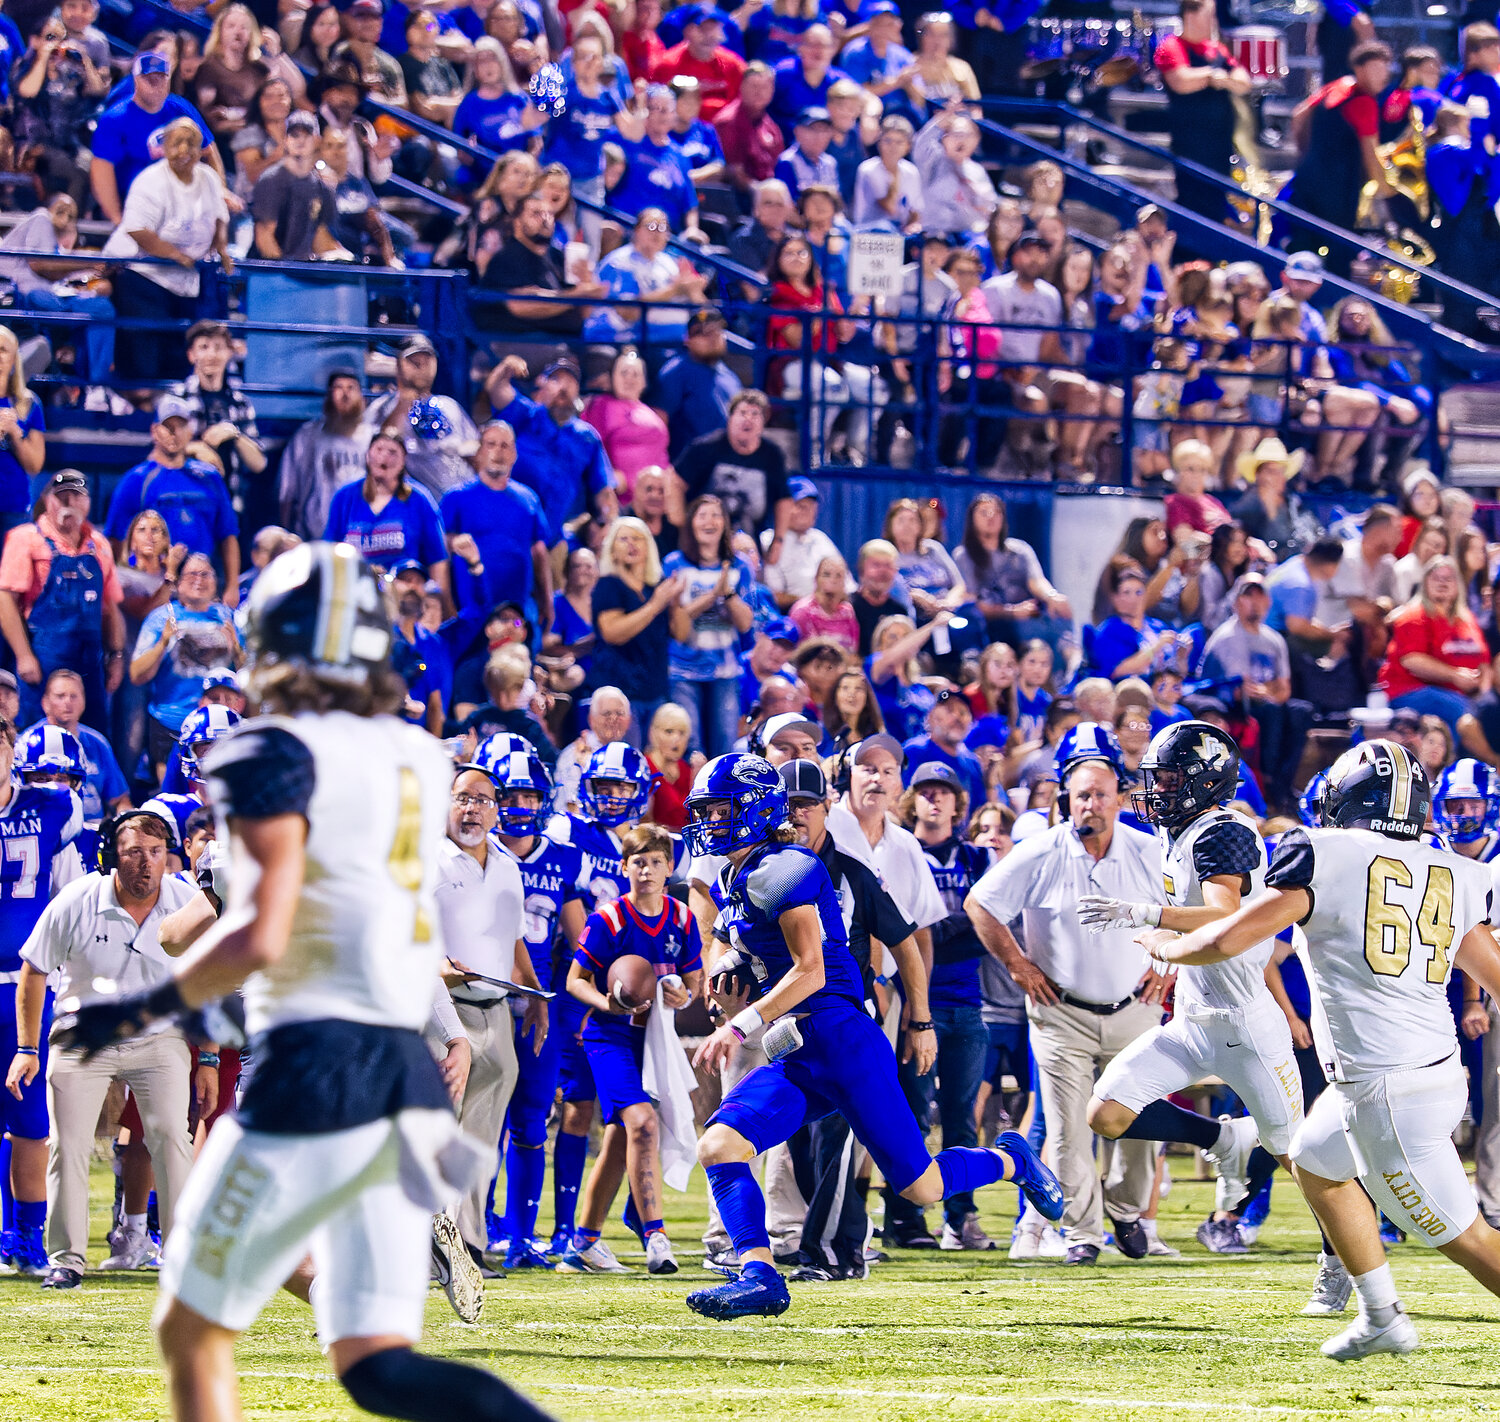 The homecoming crowd cheers as Carter Smith returns a punt, though it was called back on a blocking penalty. [view more action and buy Bulldogs prints]